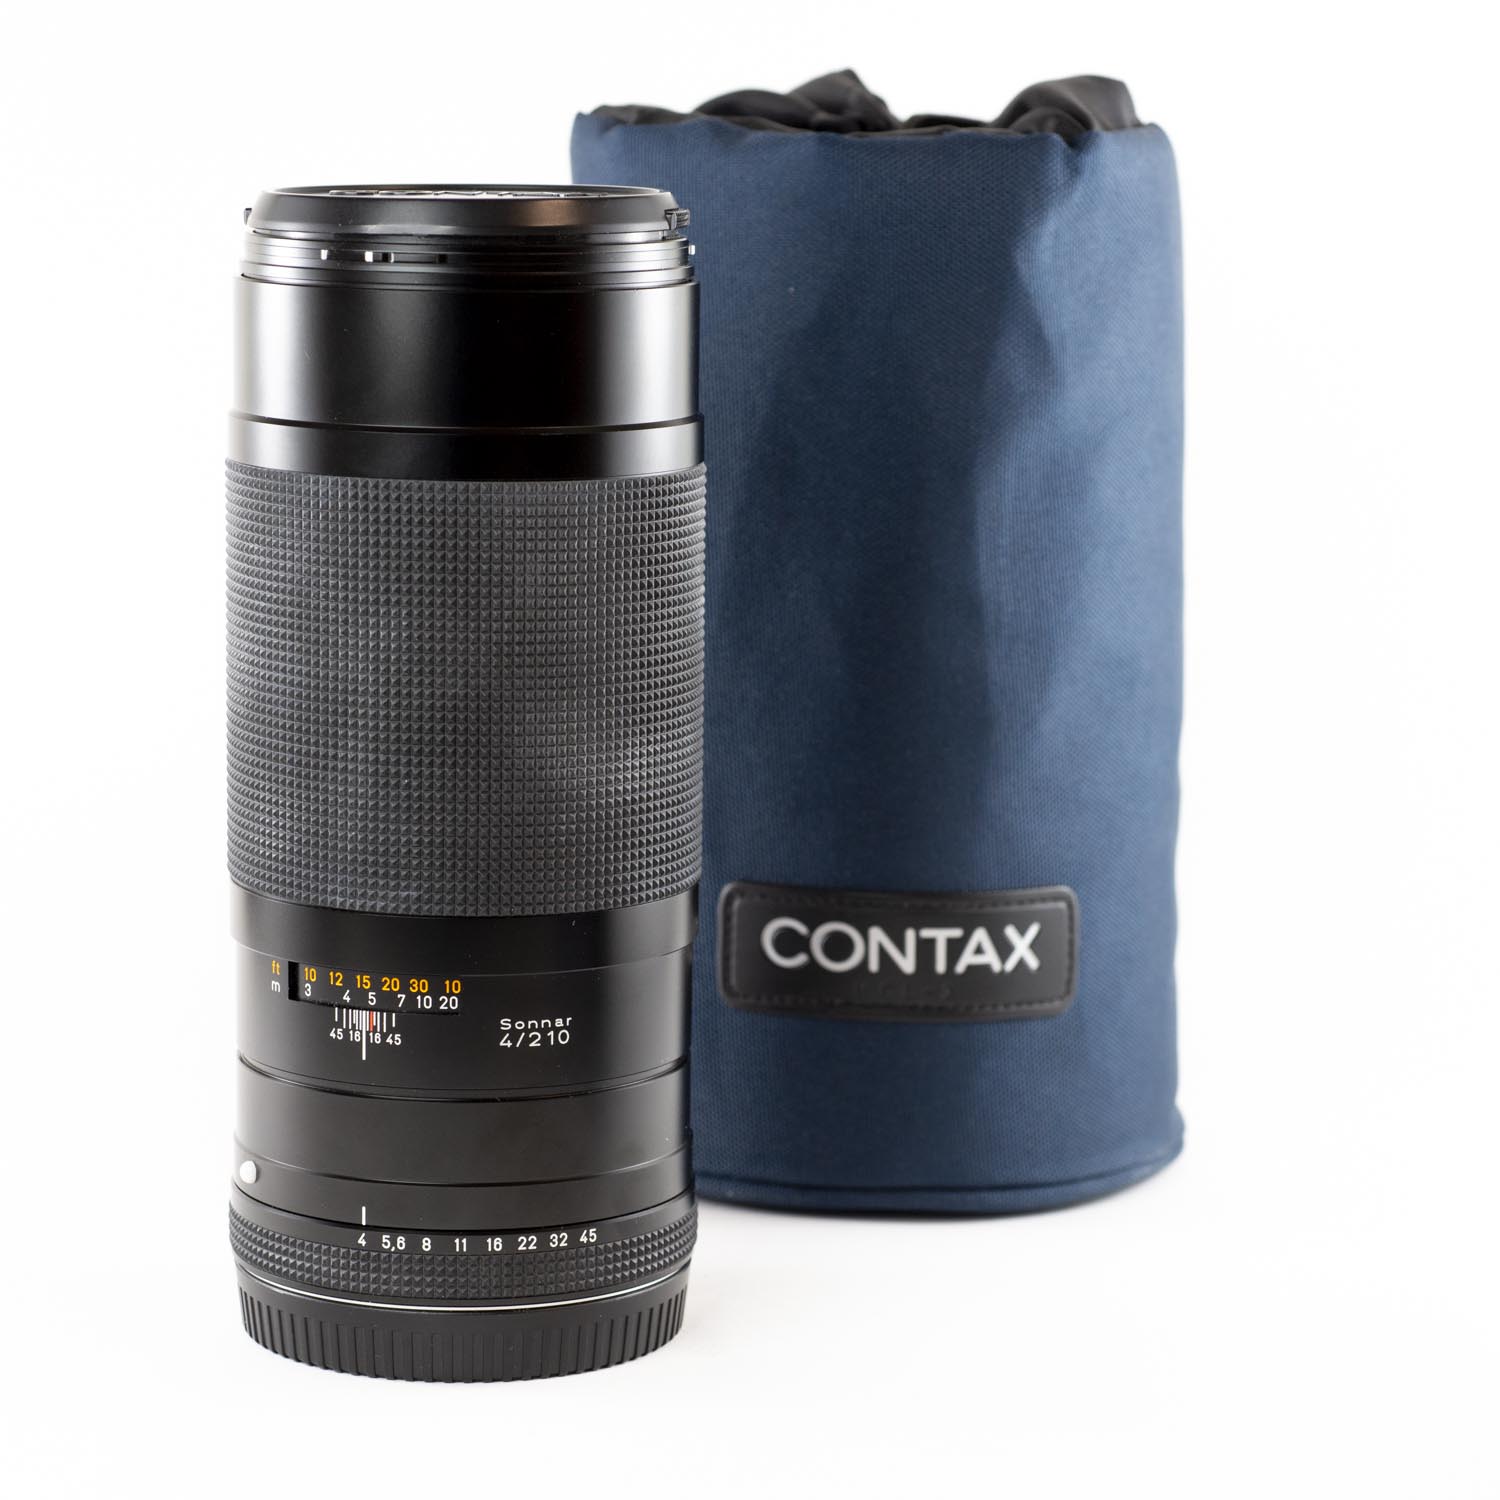 Carl Zeiss Sonnar T* 210mm f/4 for Contax 645